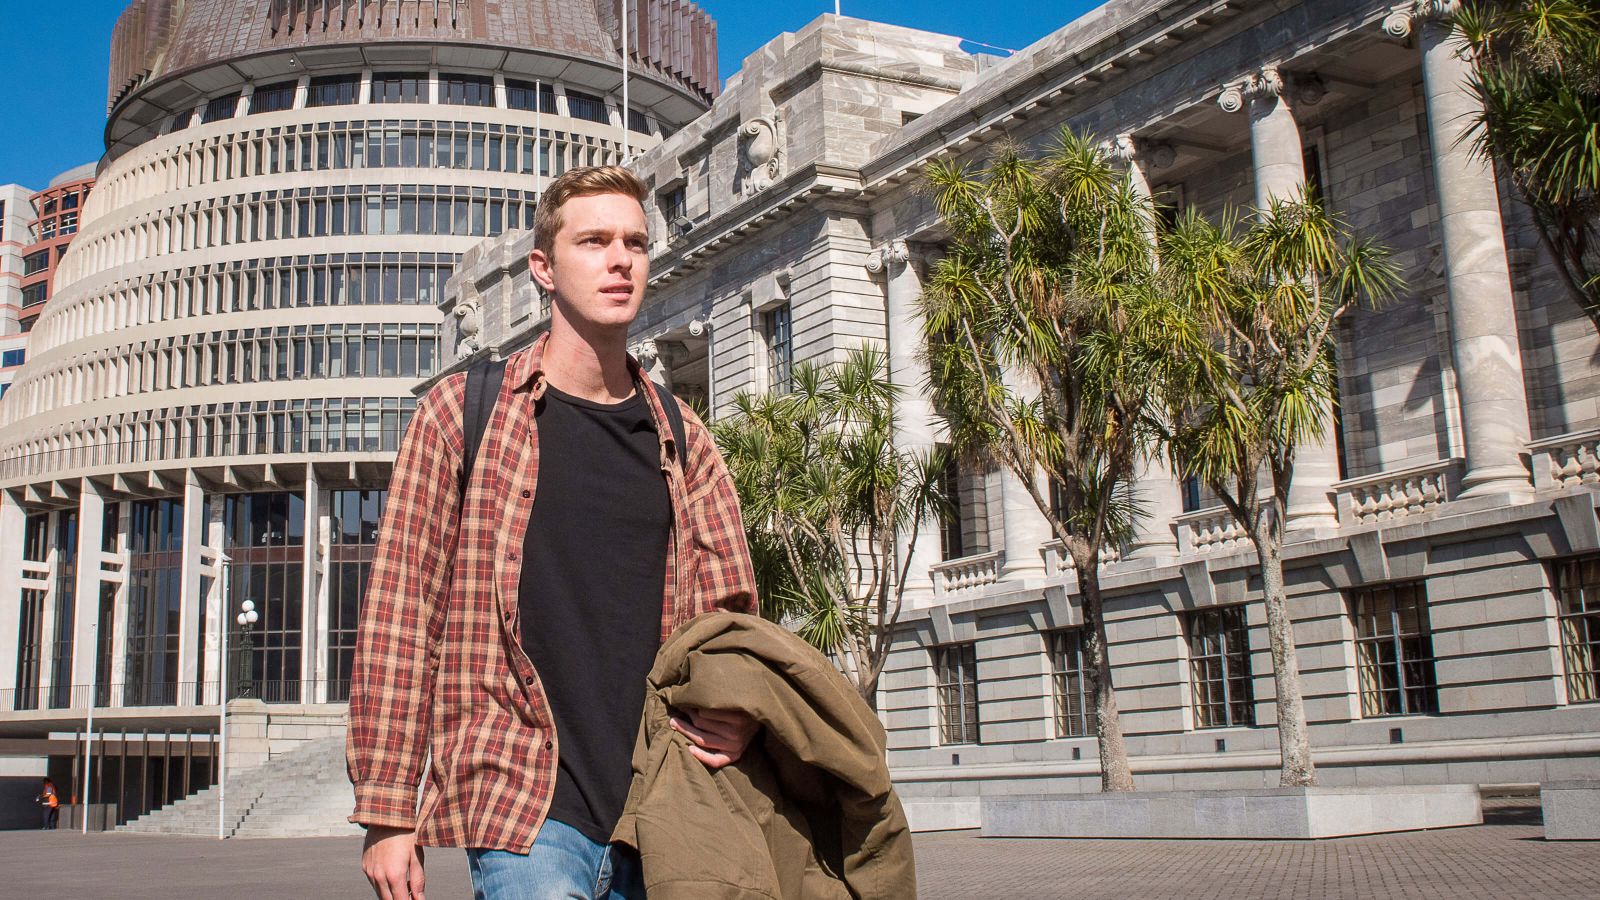 A young man dressed in a plaid shirt, black top, and blue jeans walks past the complex of New Zealand Parliament.   